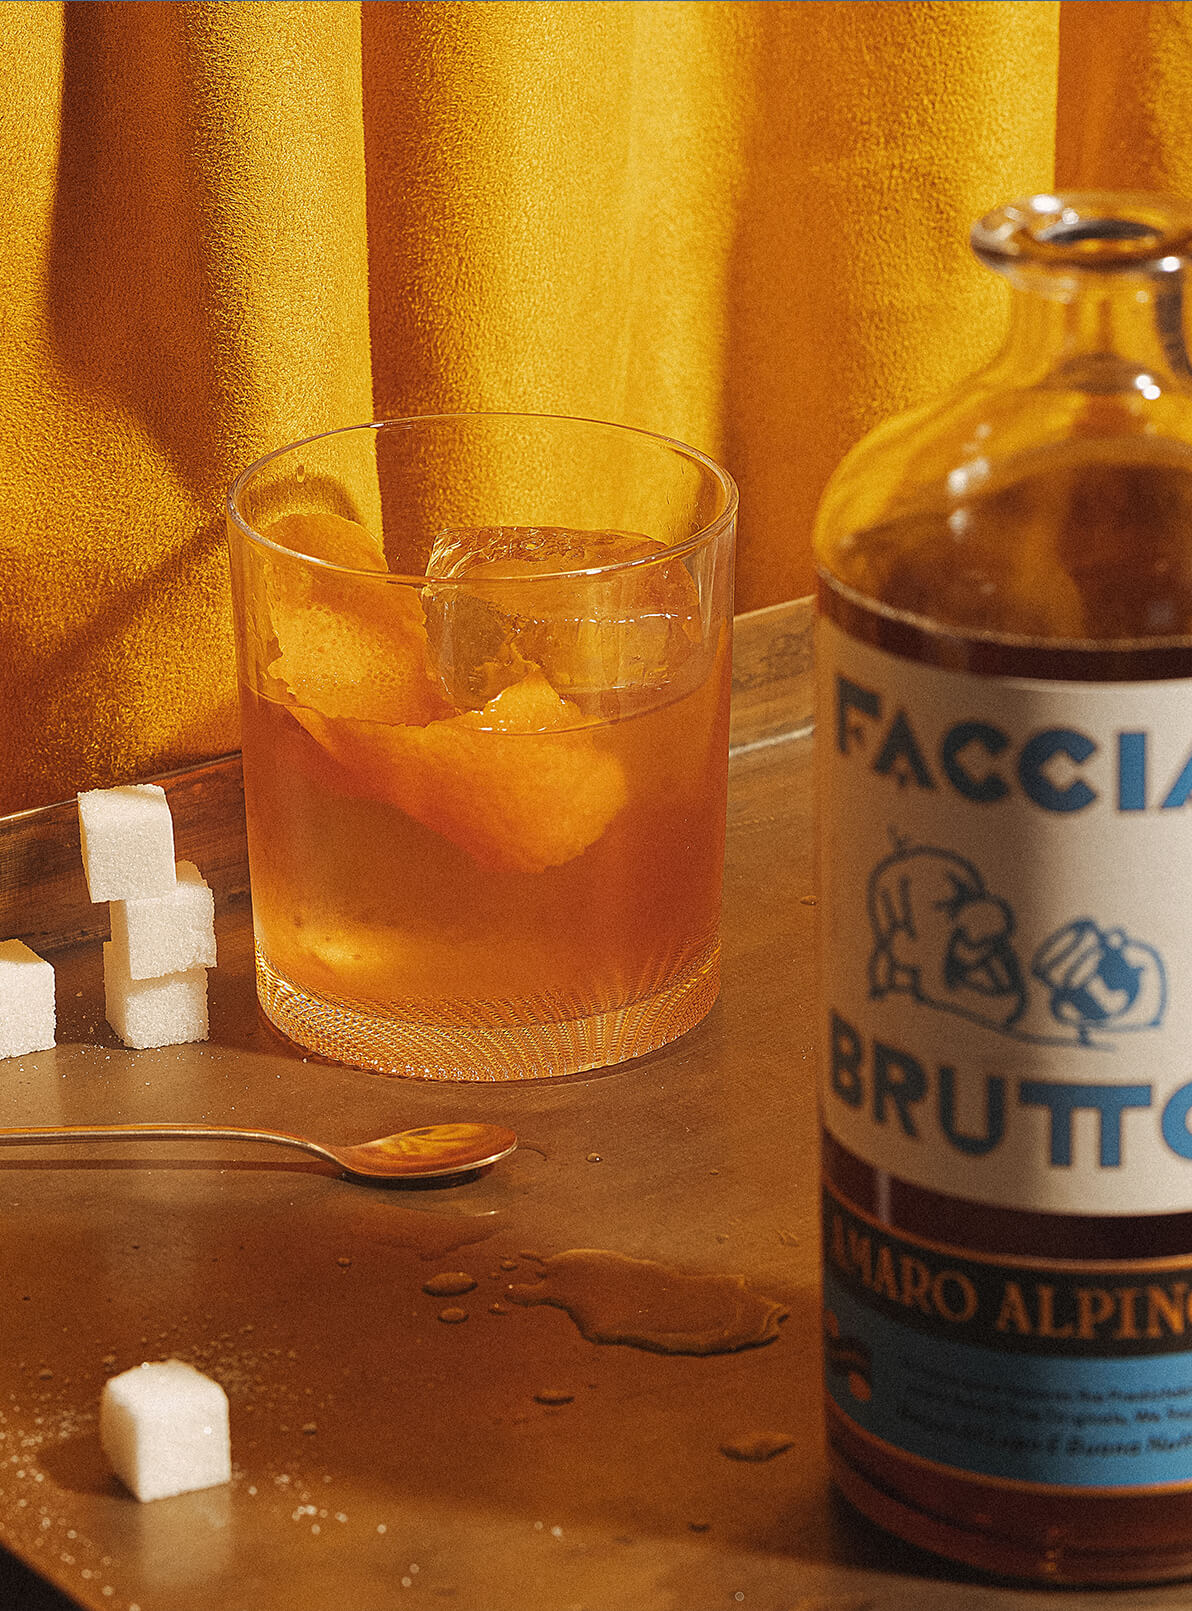 Cocktail with sugar cubes, spoon and out of focus Faccia Brutto bottles in front of yellow curtain